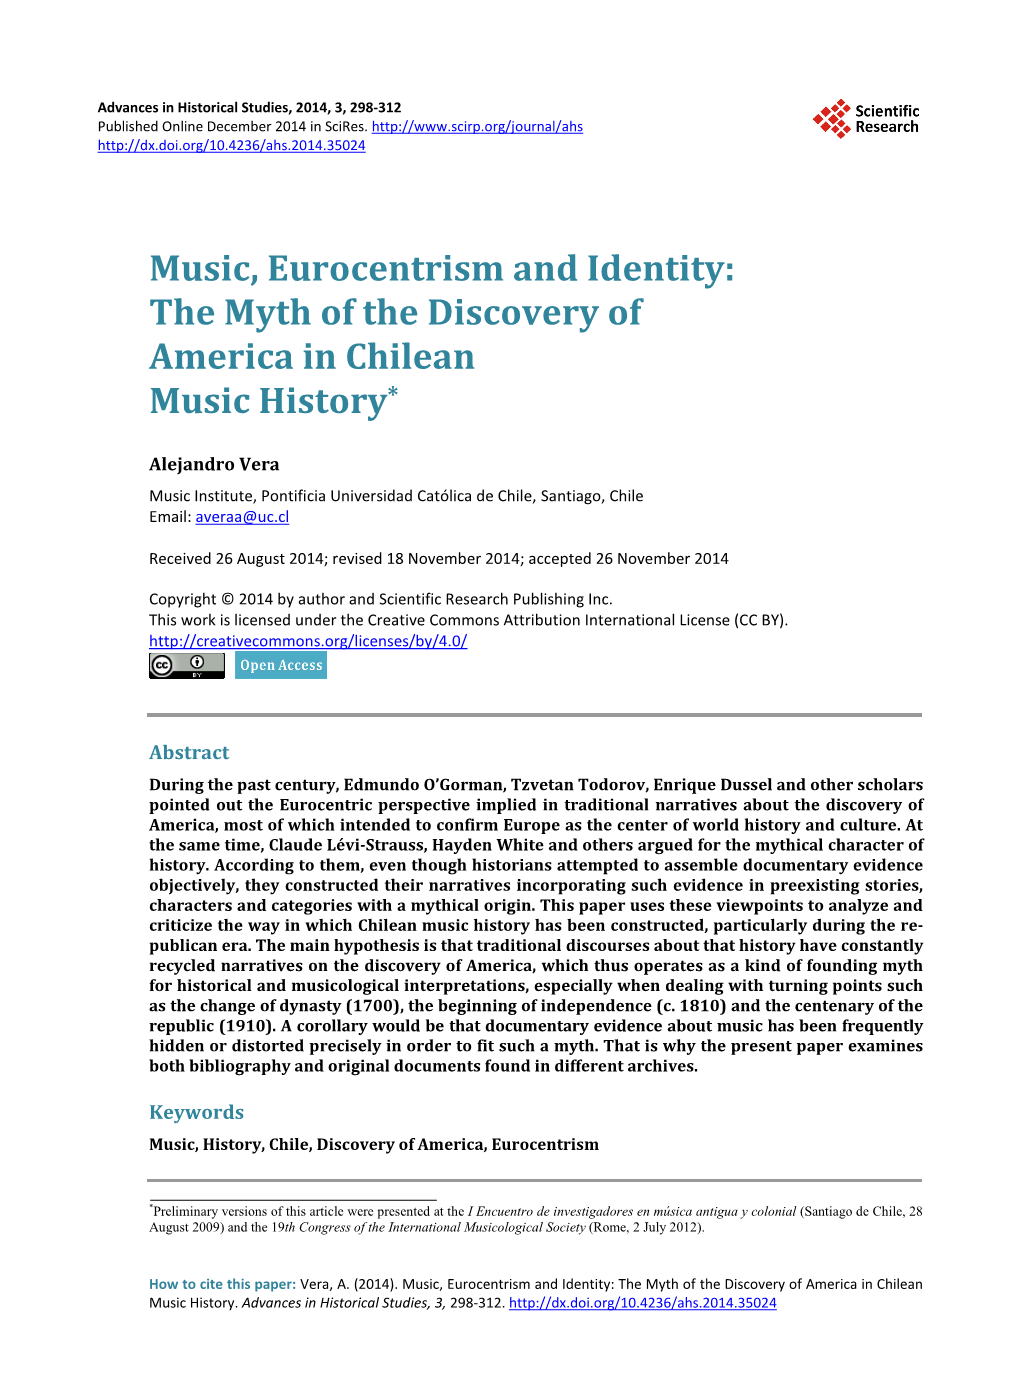 Music, Eurocentrism and Identity: the Myth of the Discovery of America in Chilean Music History*